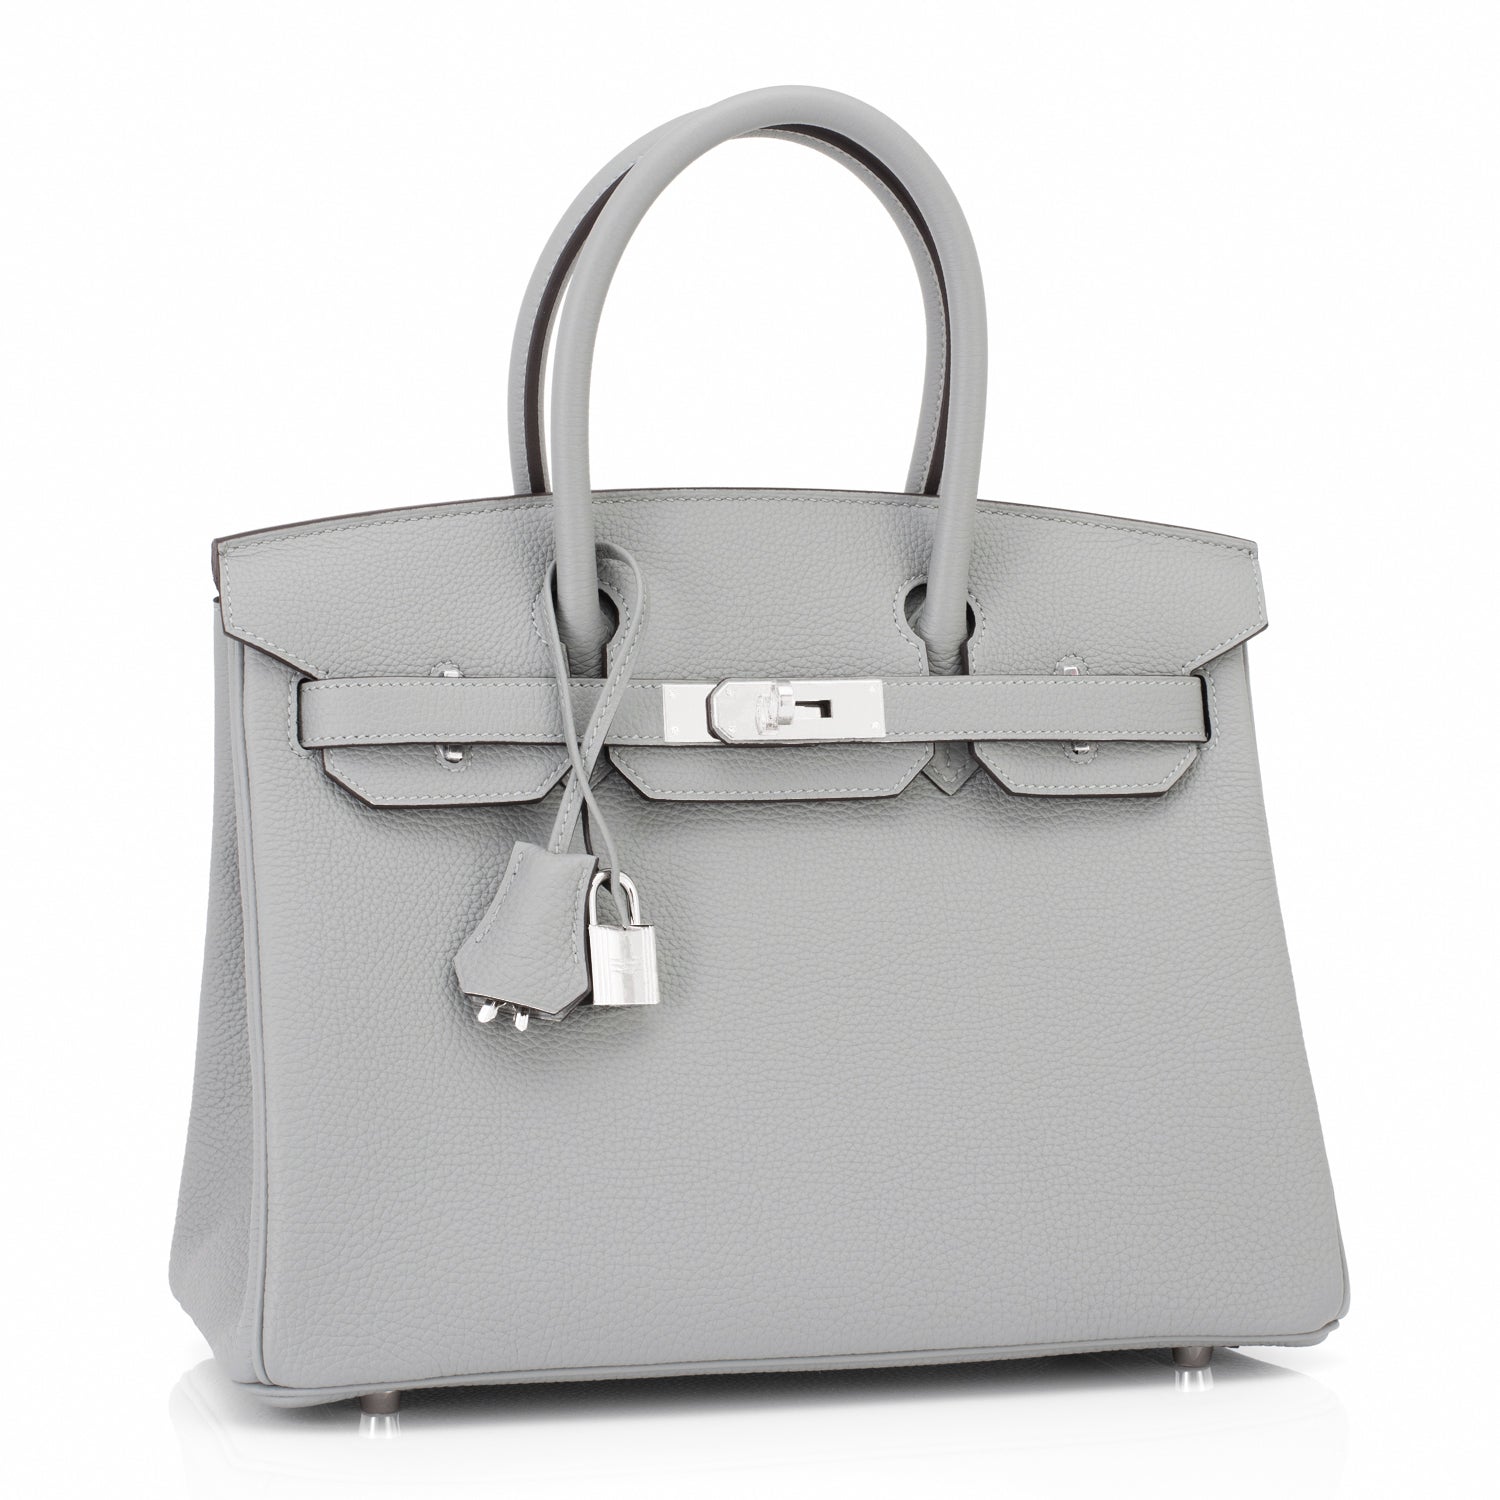 Hermes Birkin 30 Bag Gris Mouette Gold Hardware Togo Leather • MIGHTYCHIC •  